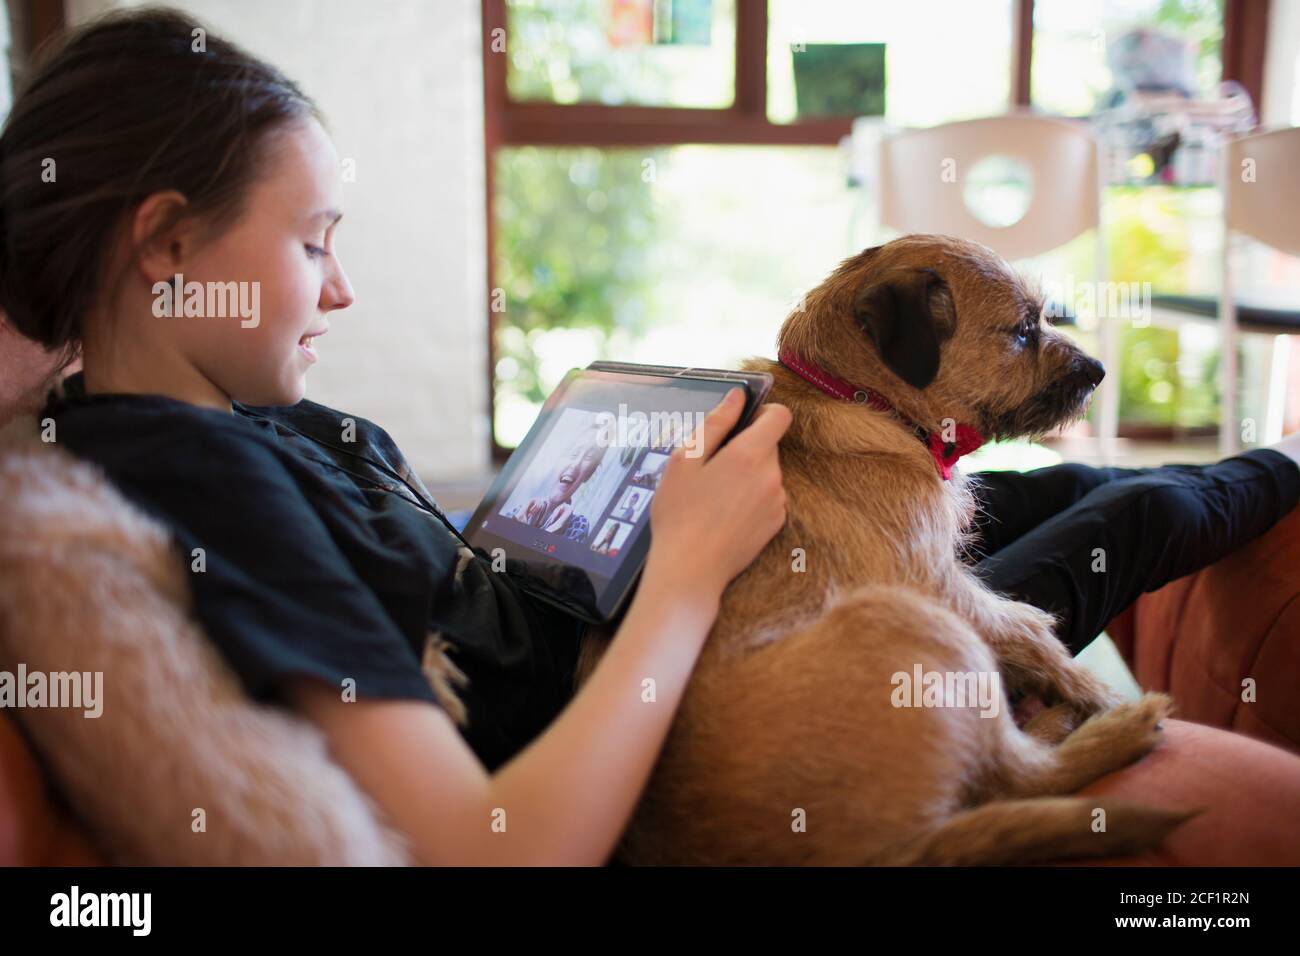 Girl with dog video chatting with friends on digital tablet screen Stock Photo